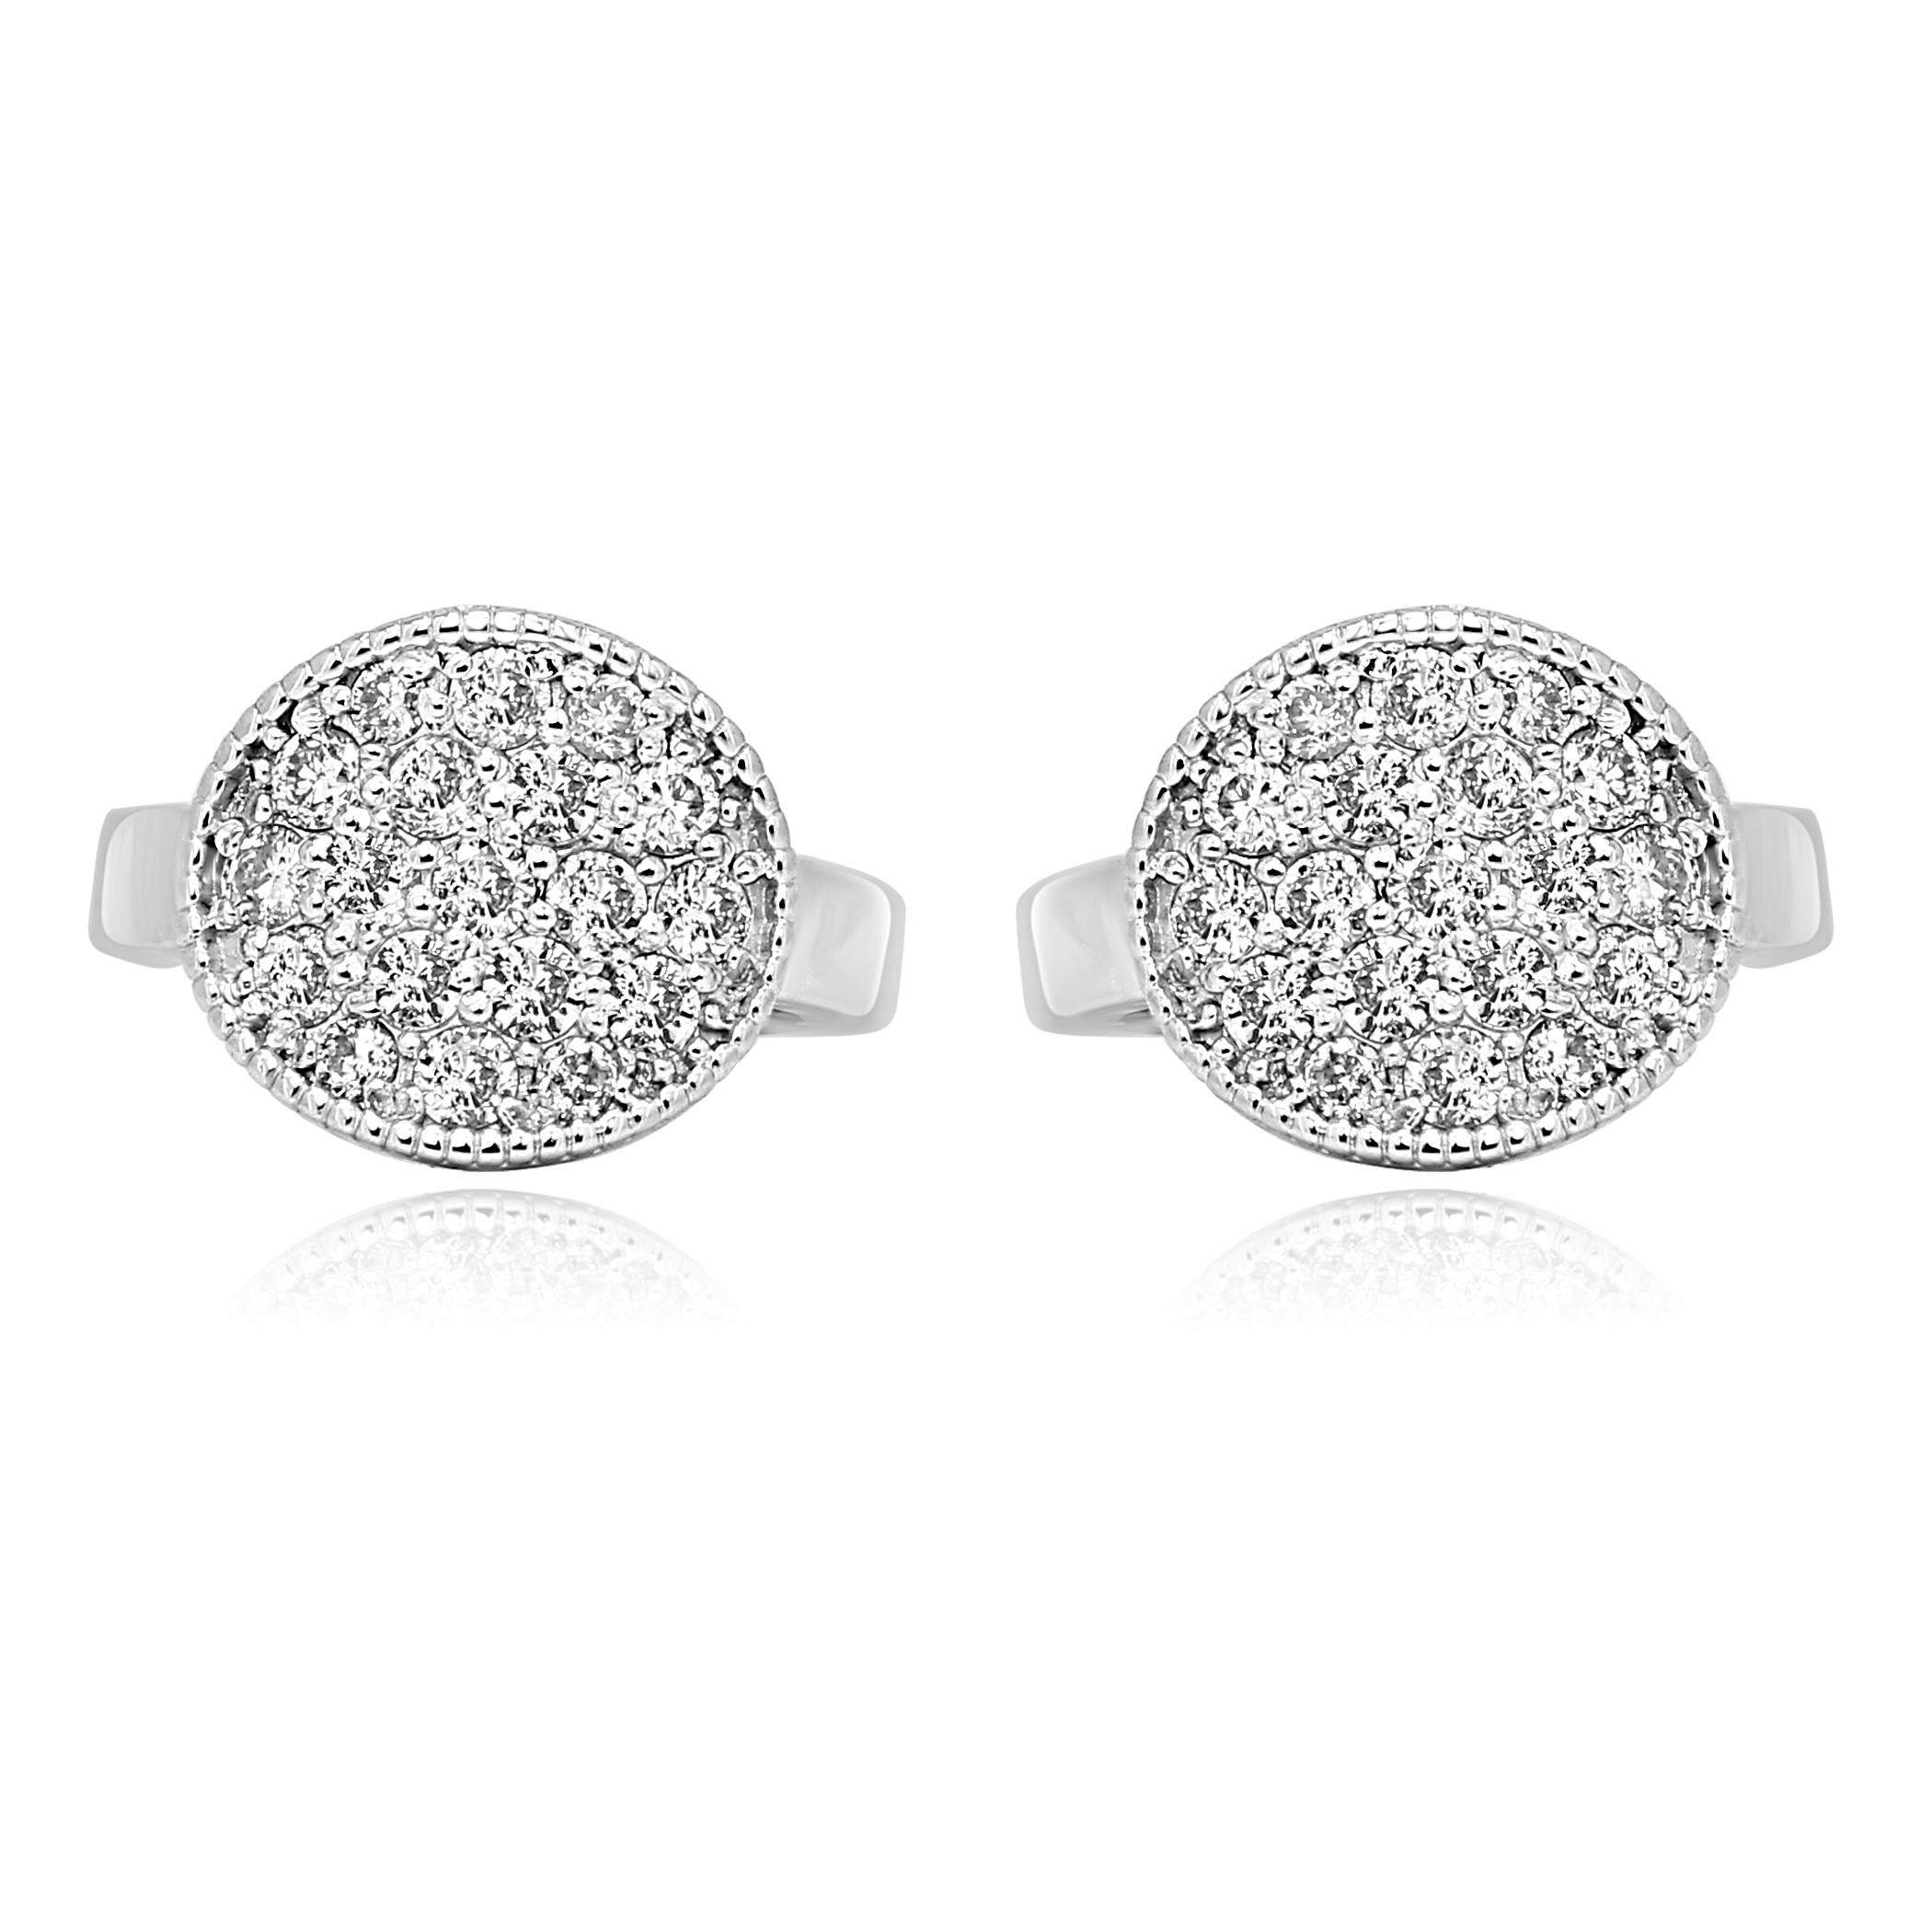 38 White Colorless Diamond SI Clarity 0.64 Carat Set in in 14K Clip on Dangle Fashion Everyday wear Chic Earrings.

Total Diamond Weight 0.64 Carat